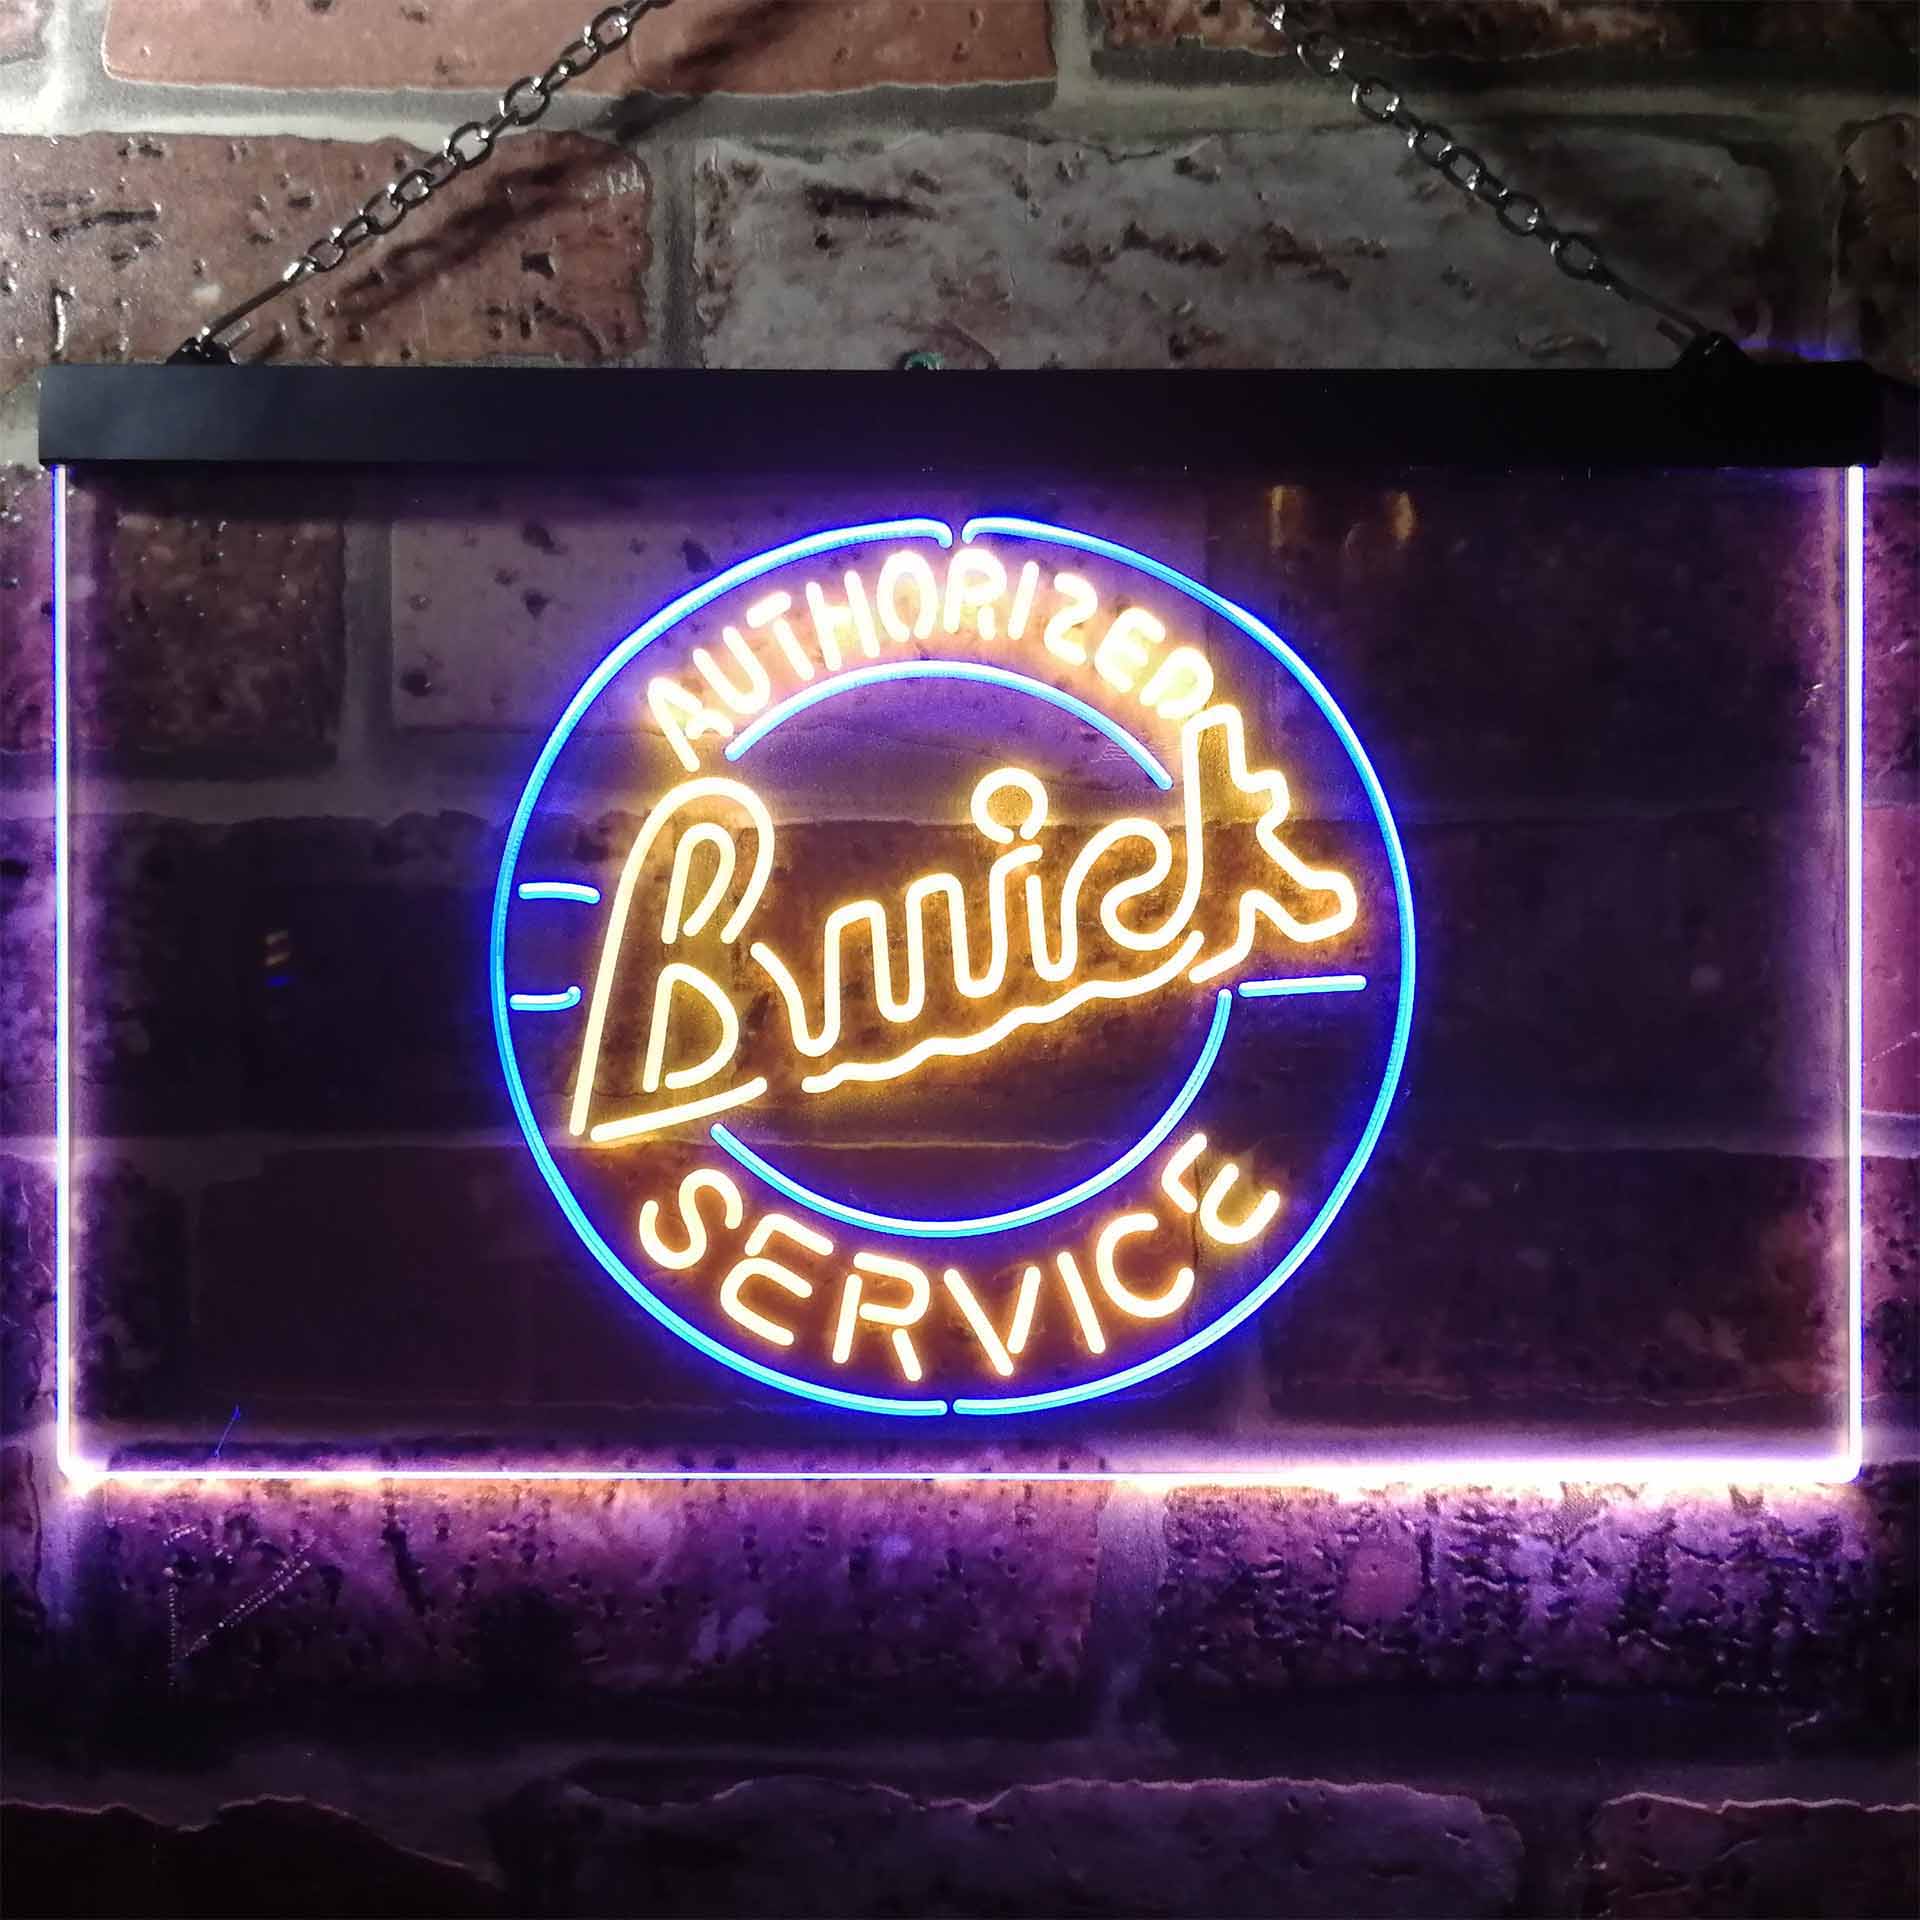 Buick Car Service LED Neon Sign